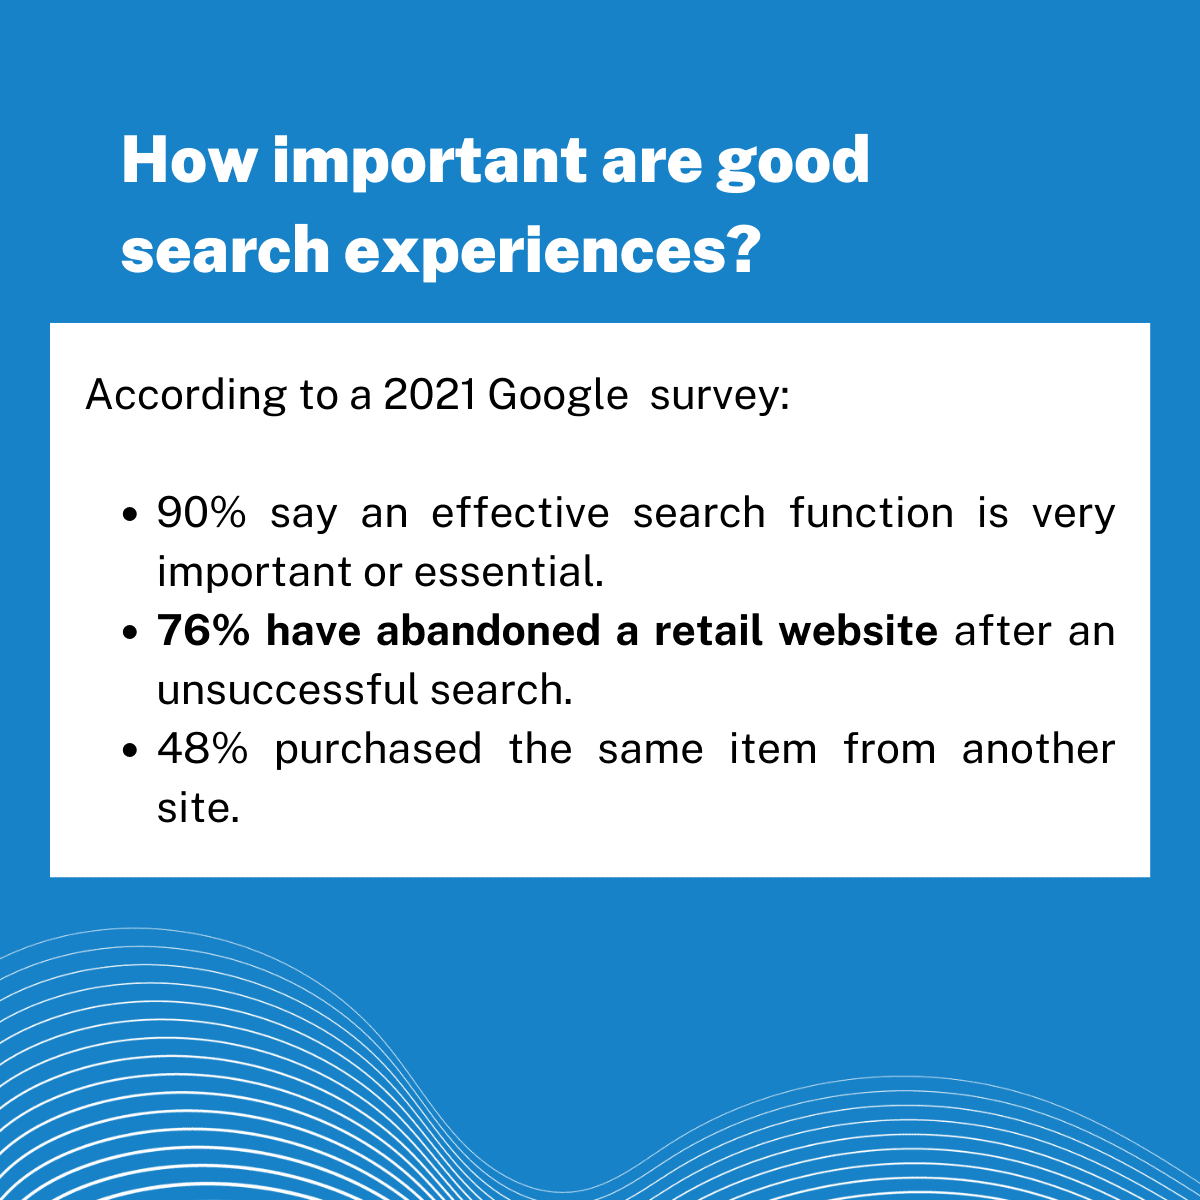 Data points from a 2021 Google survey about why good search experiences are important. 